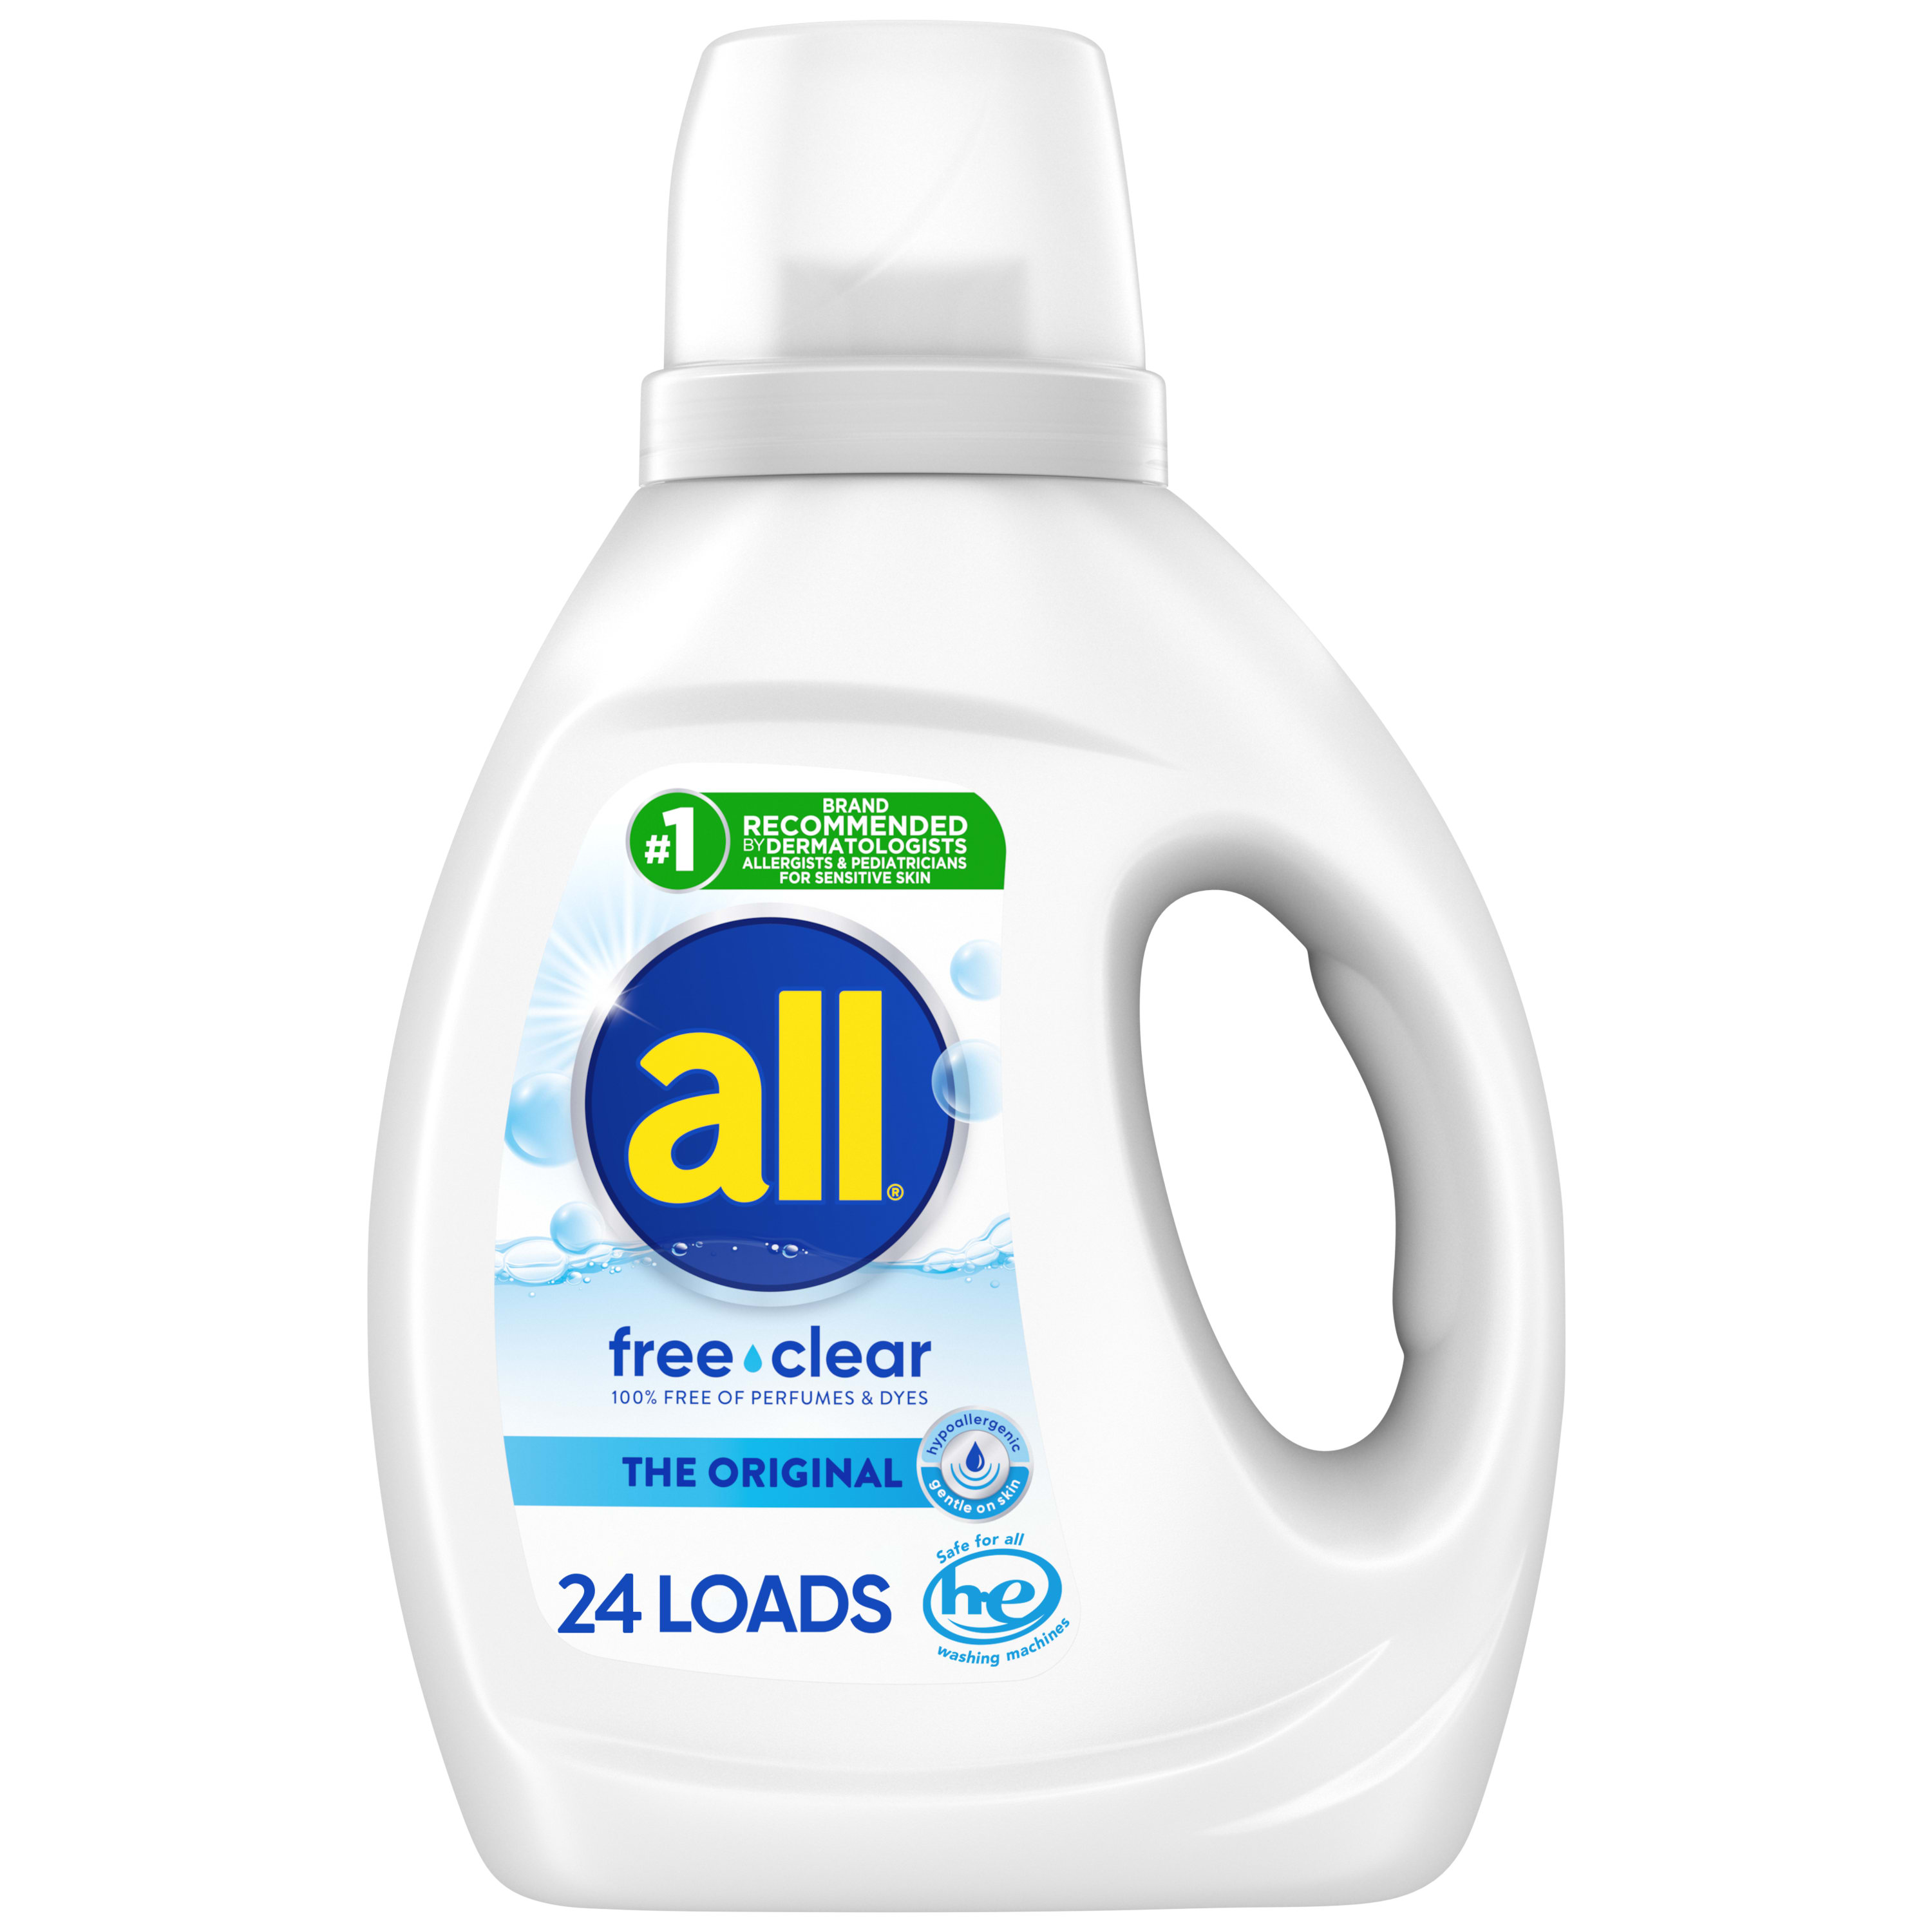 all Liquid Laundry Detergent, Free Clear for Sensitive Skin, 36 Fluid Ounces, 24 Loads - image 1 of 9